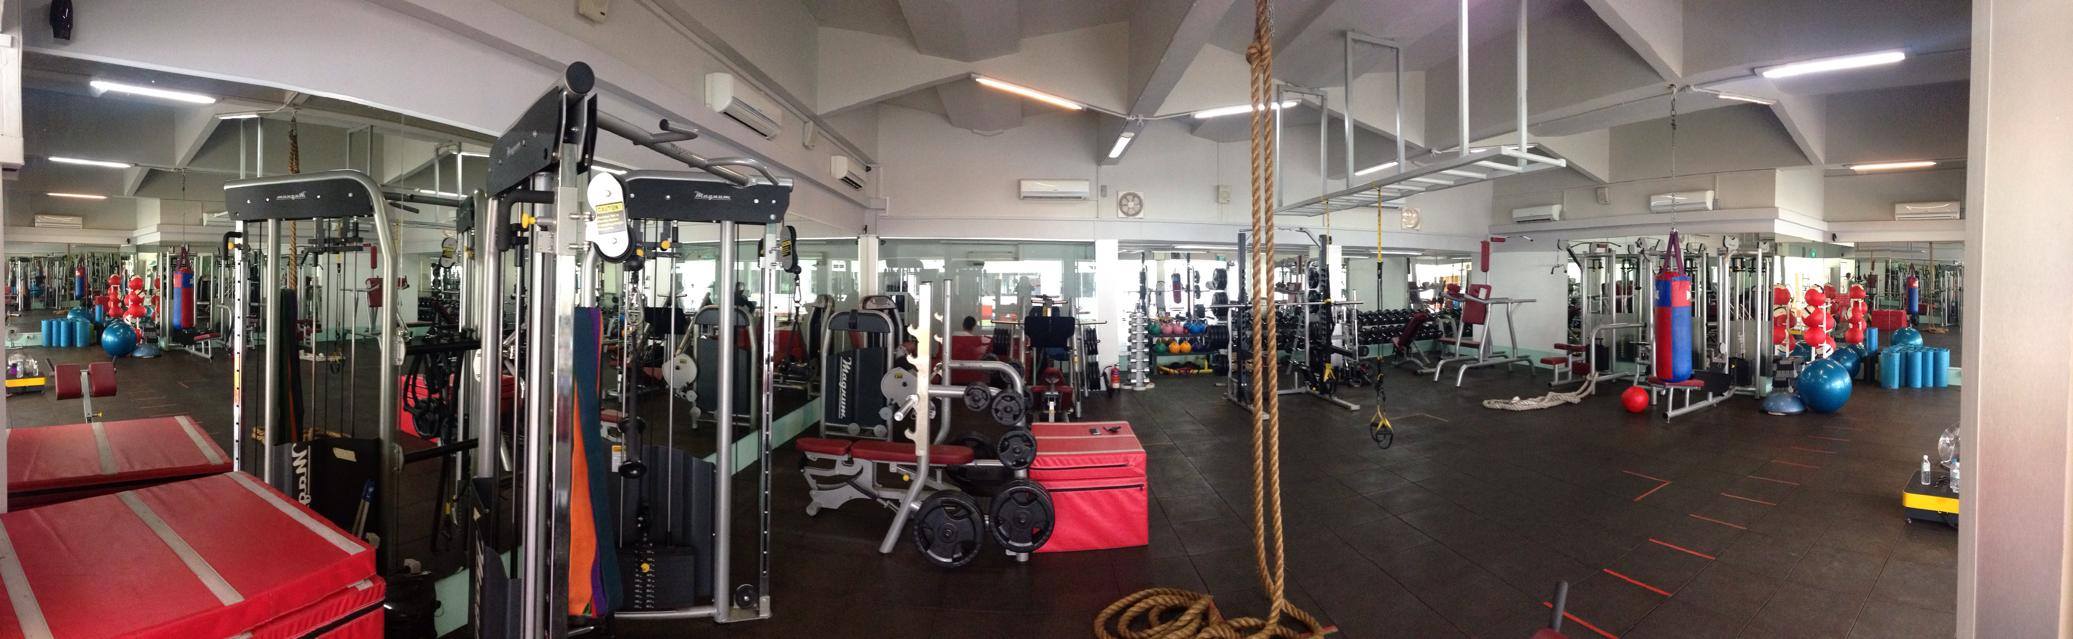 The Right Fit Serangoon Gardens 24 hours Gym